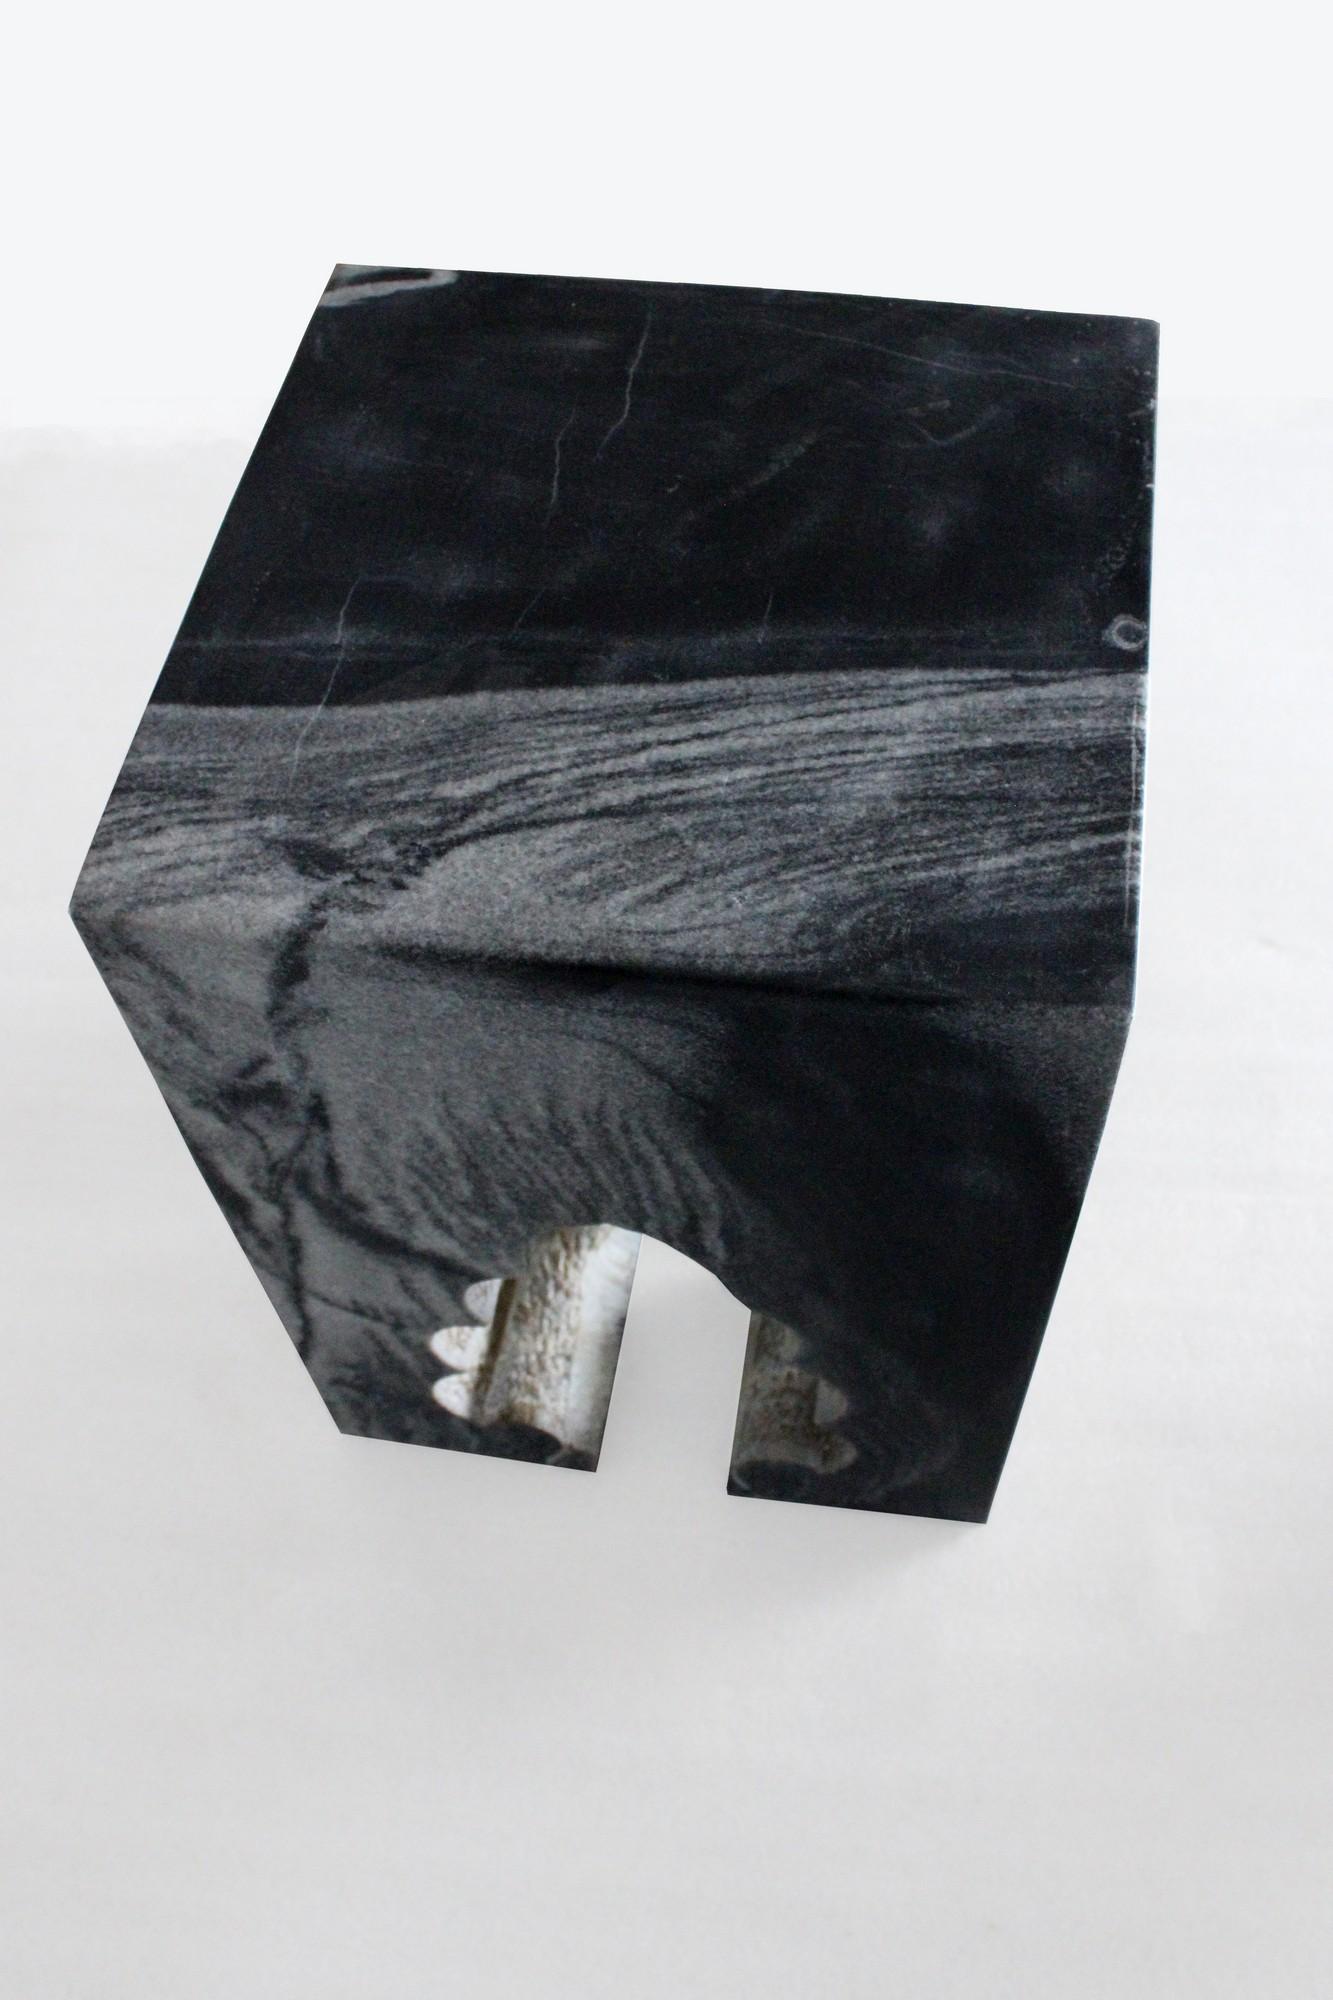 Hand-Carved Jahangir II Side Table in Black Marble by Paul Mathieu for Stephanie Odegard For Sale